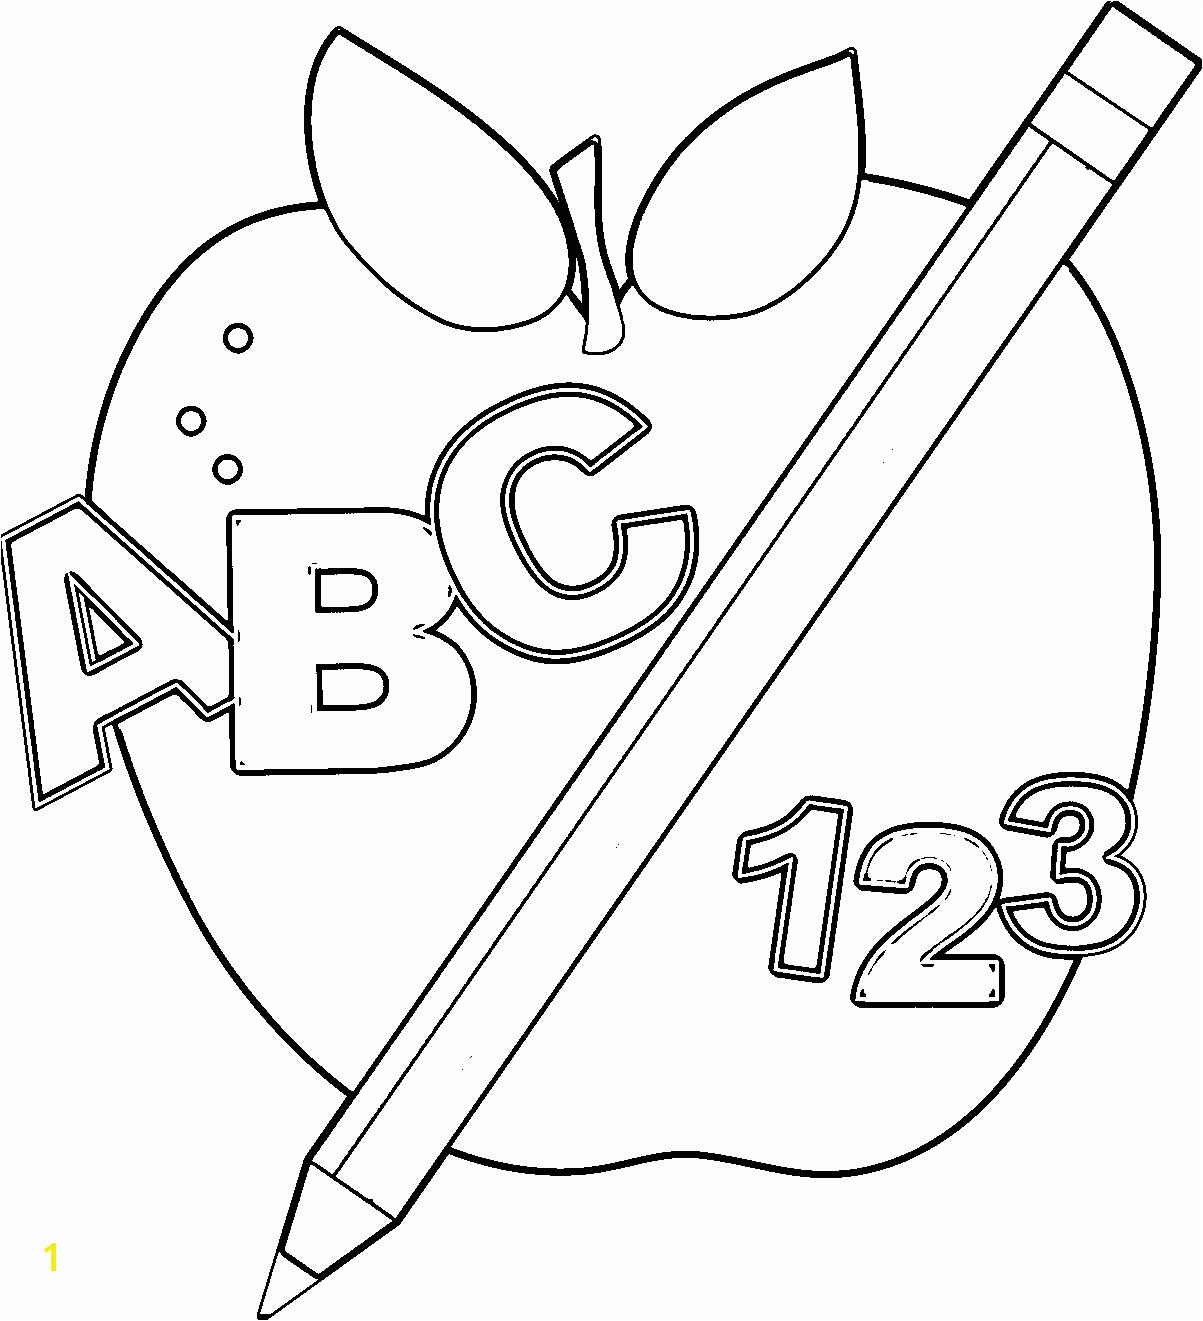 Abc blocks clipart black and white free clipart image